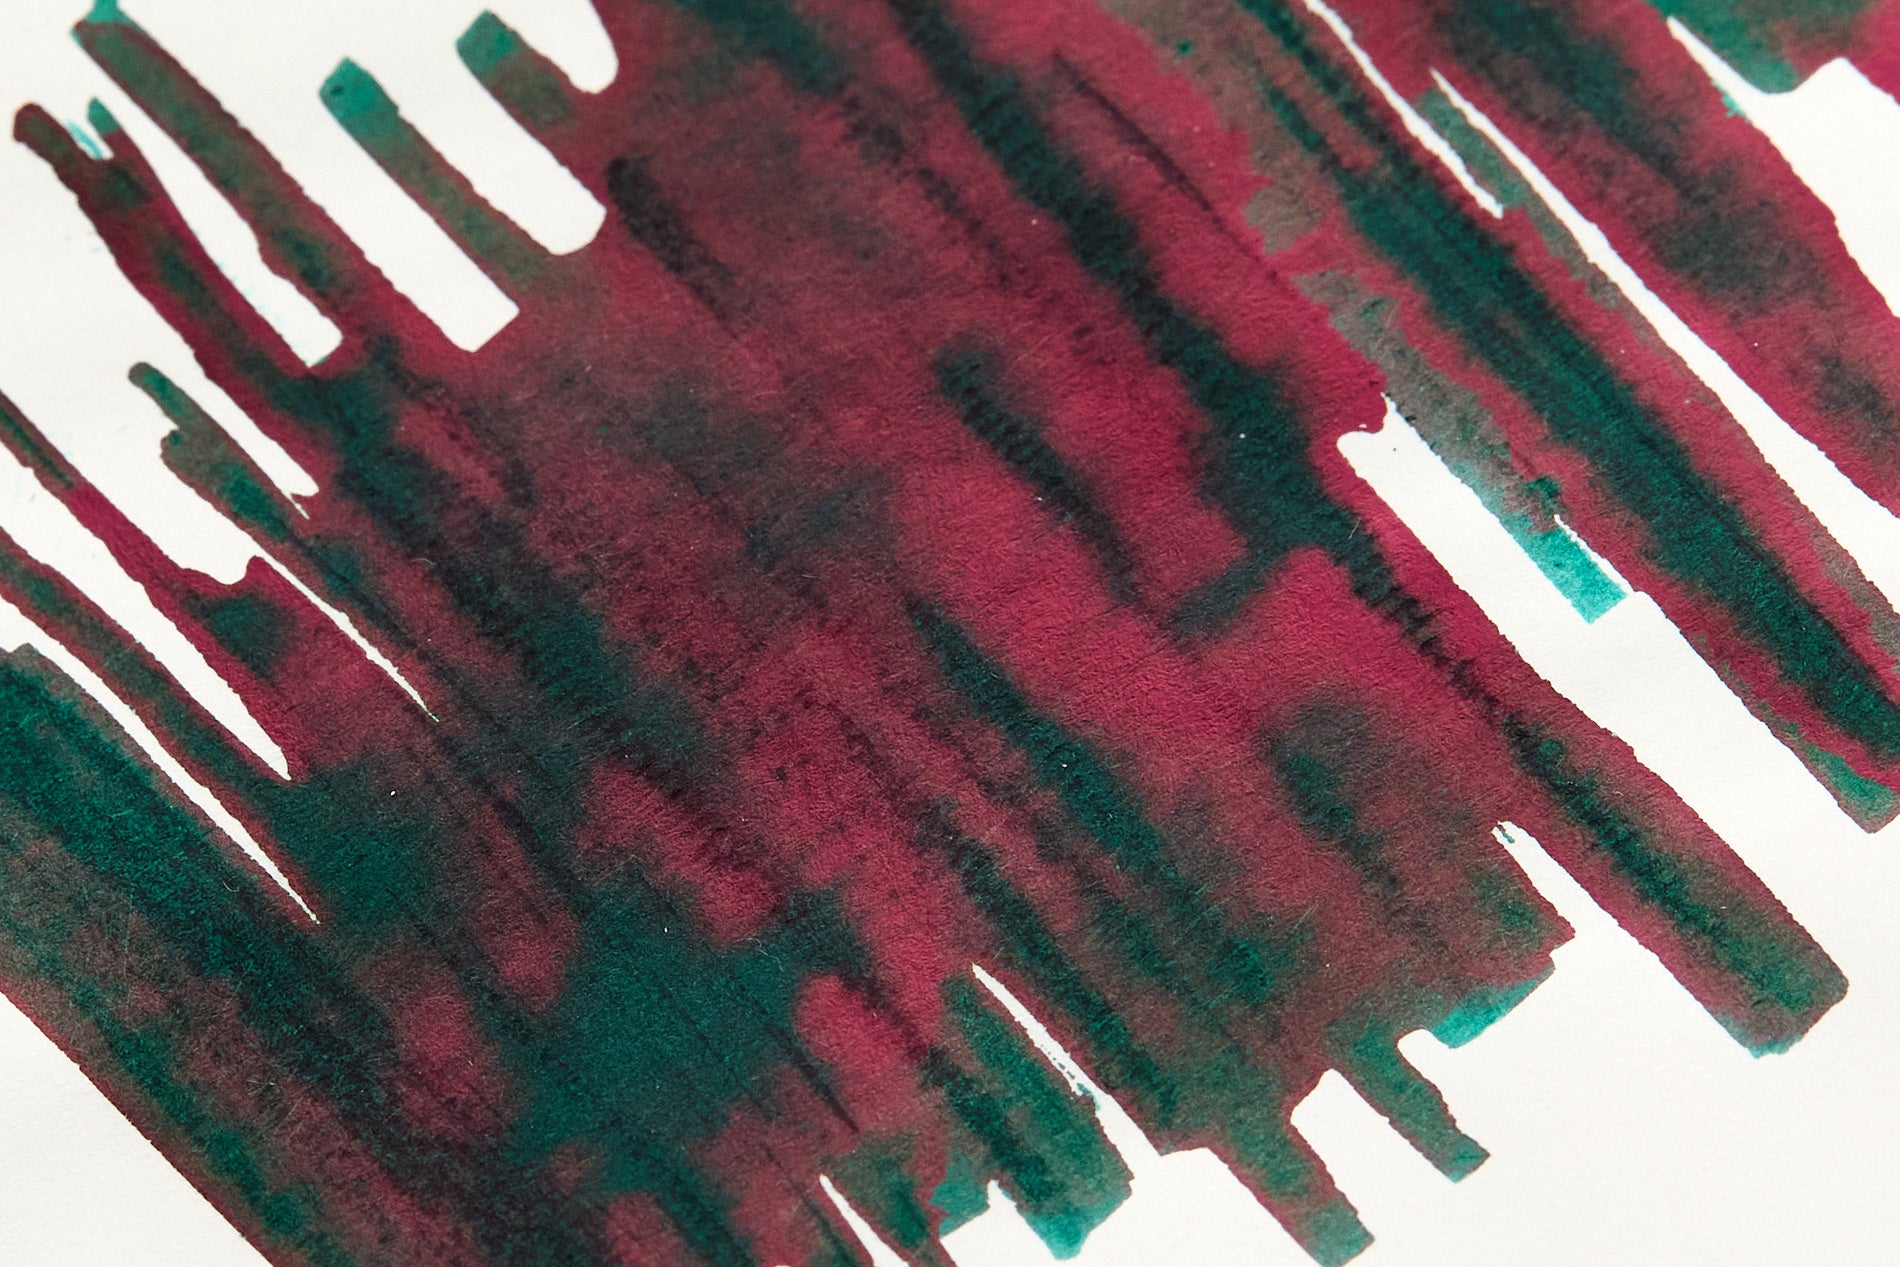 Diamine Holly Fountain Pen Ink swab upclose with lots of red sheen on green ink